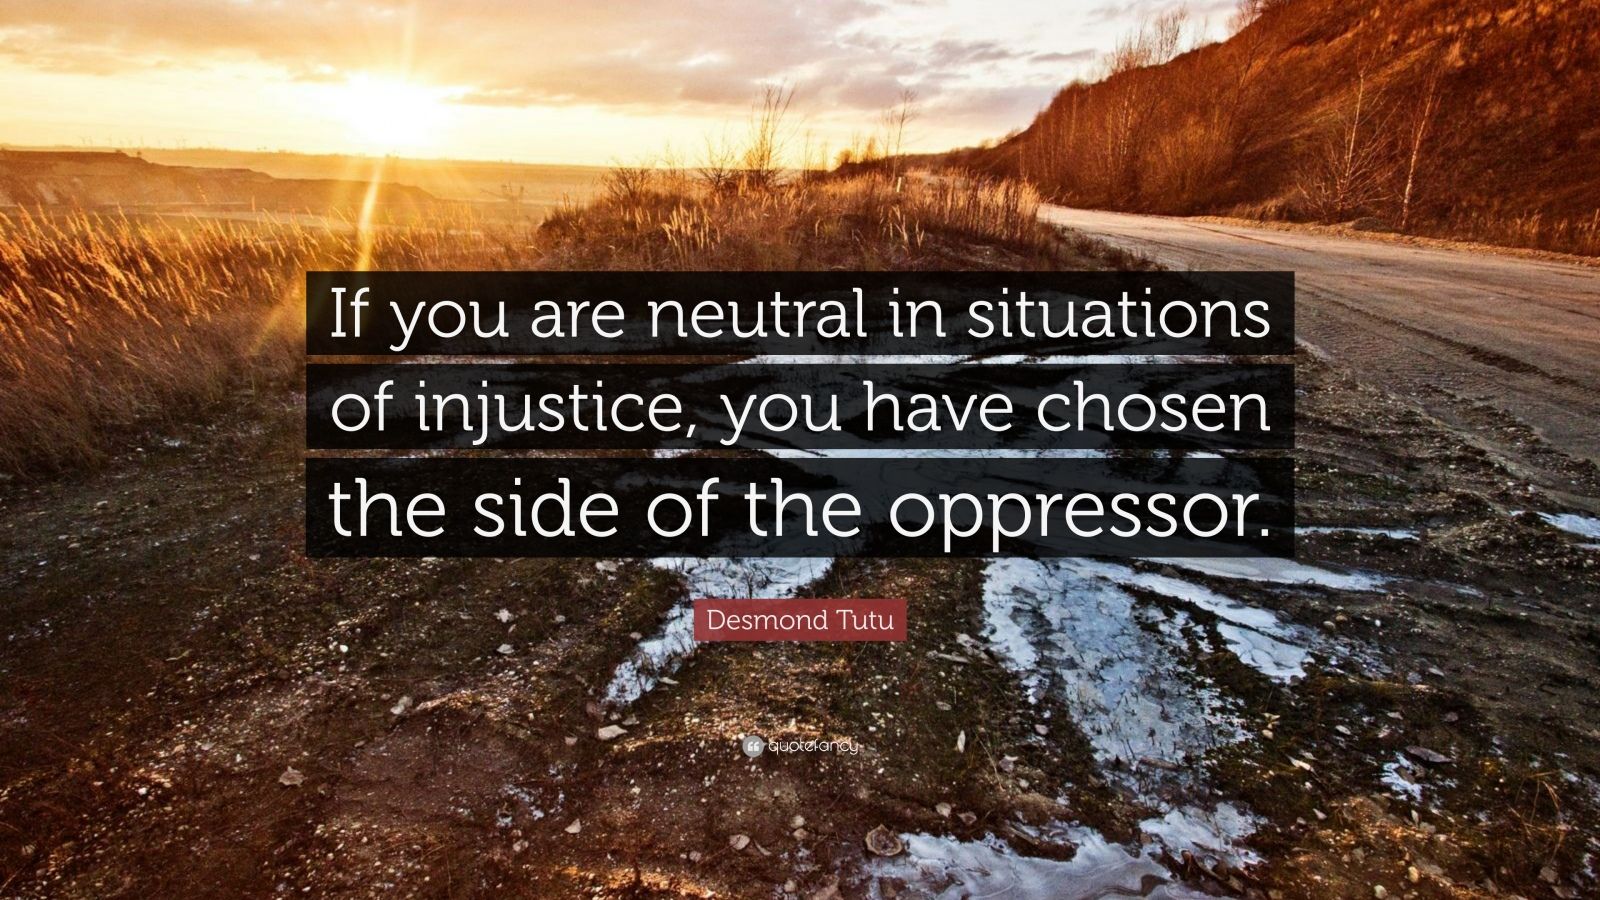 Desmond Tutu Quote: “If you are neutral in situations of injustice, you